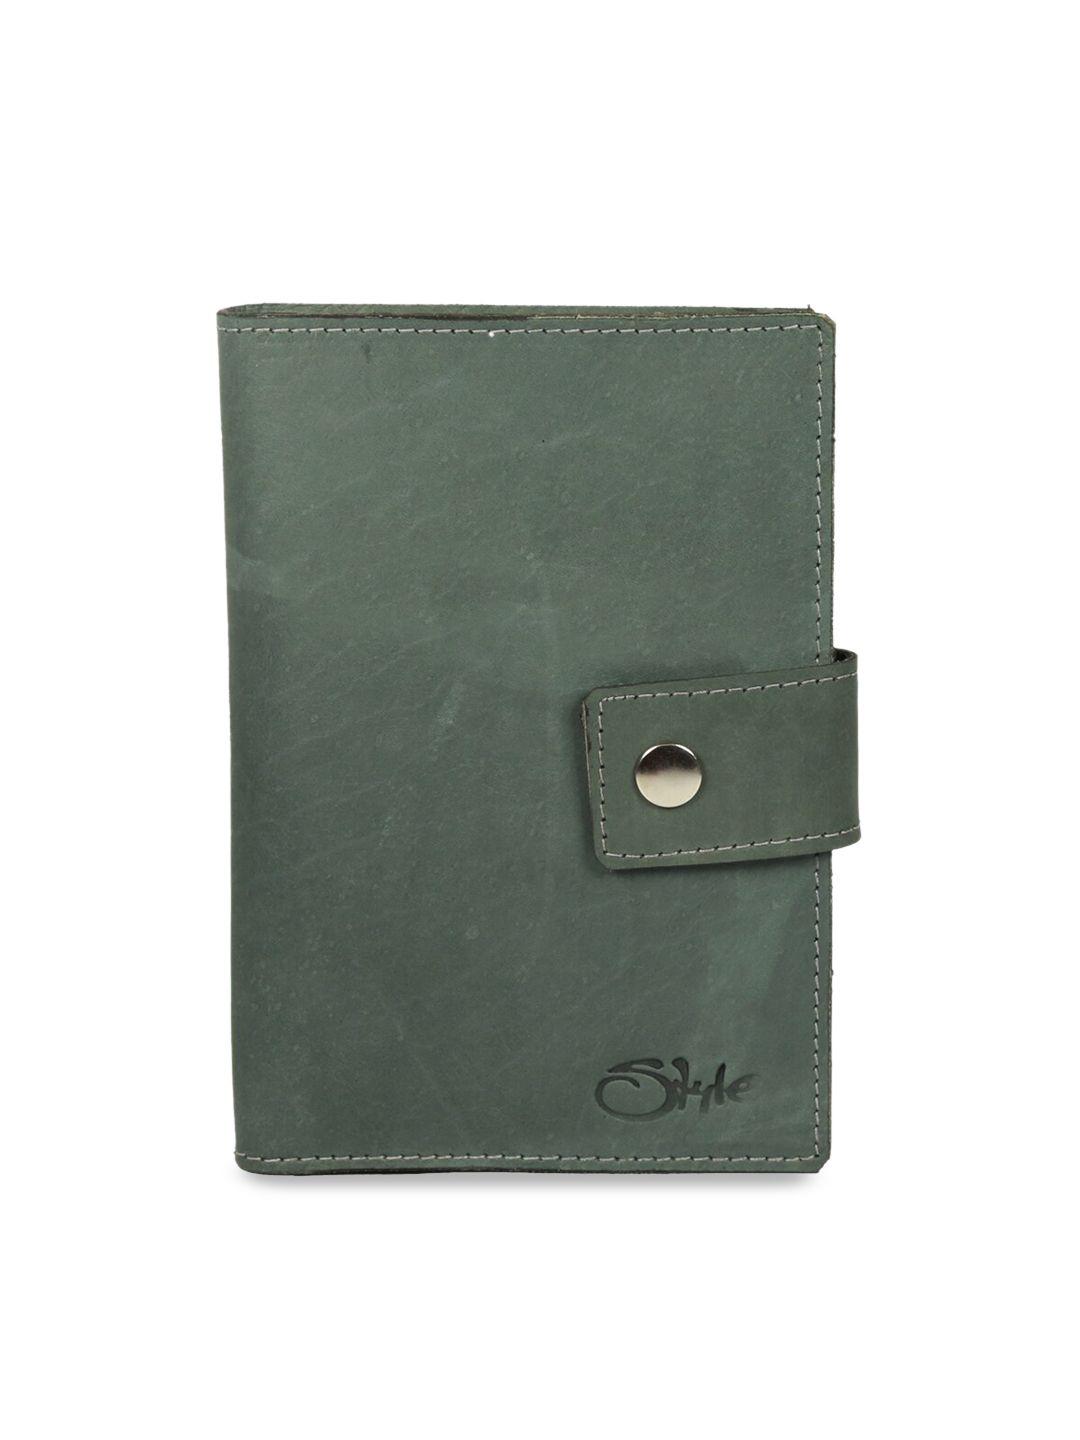 style shoes textured leather passport cover